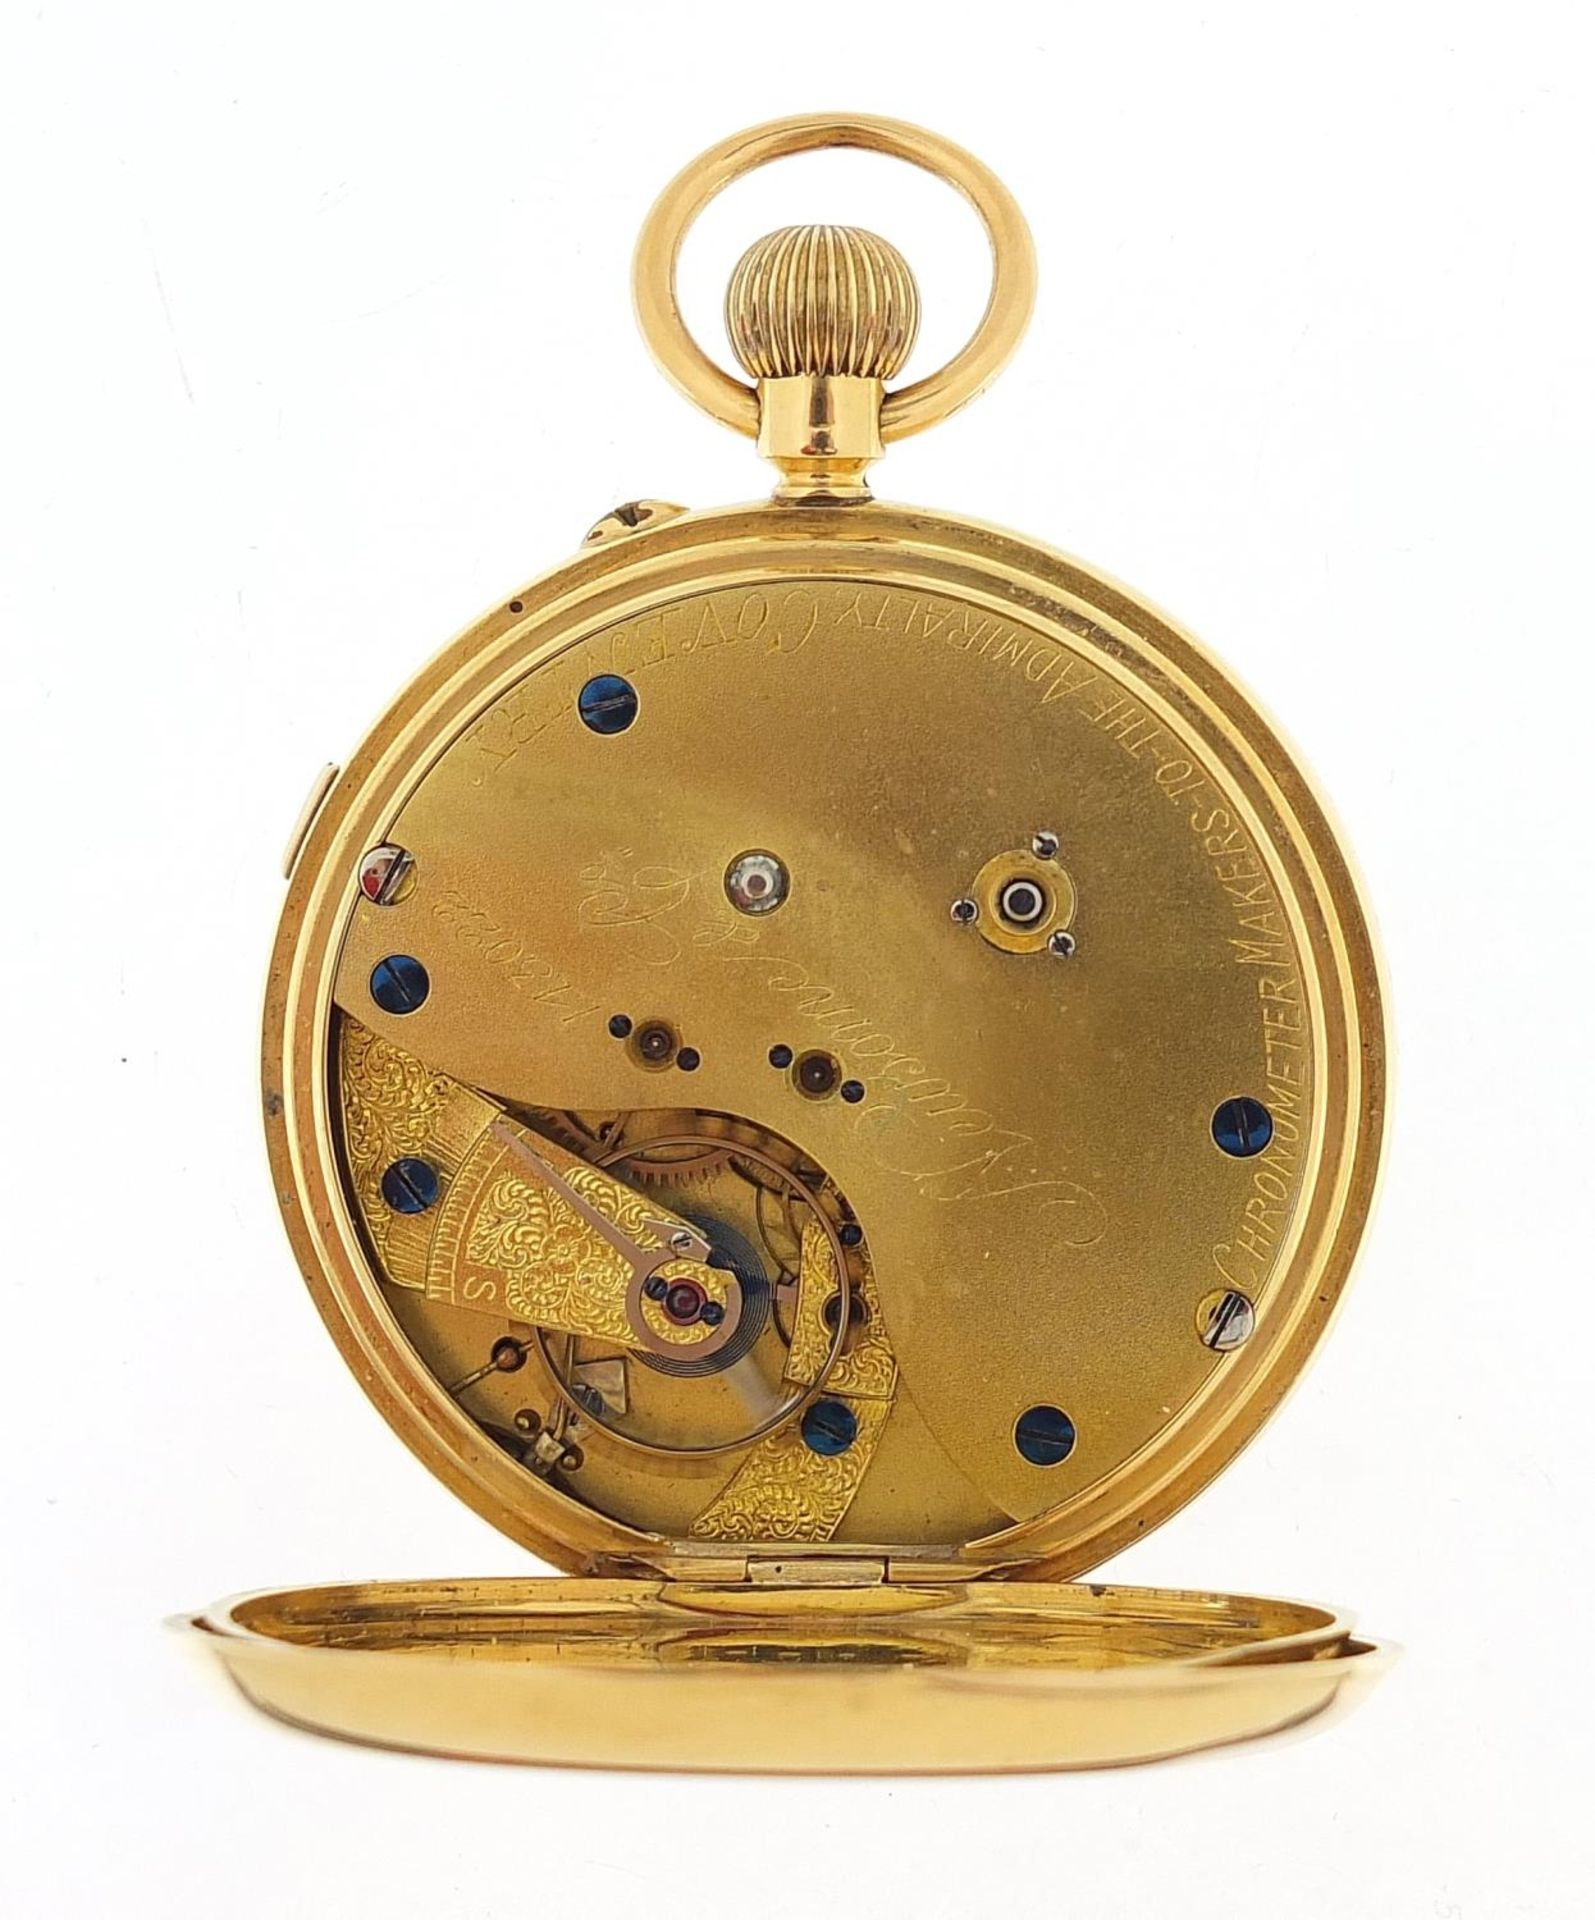 Newsome & Co Coventry, gentlemen's 18ct gold open face chronograph pocket watch with enamelled dial, - Image 2 of 5